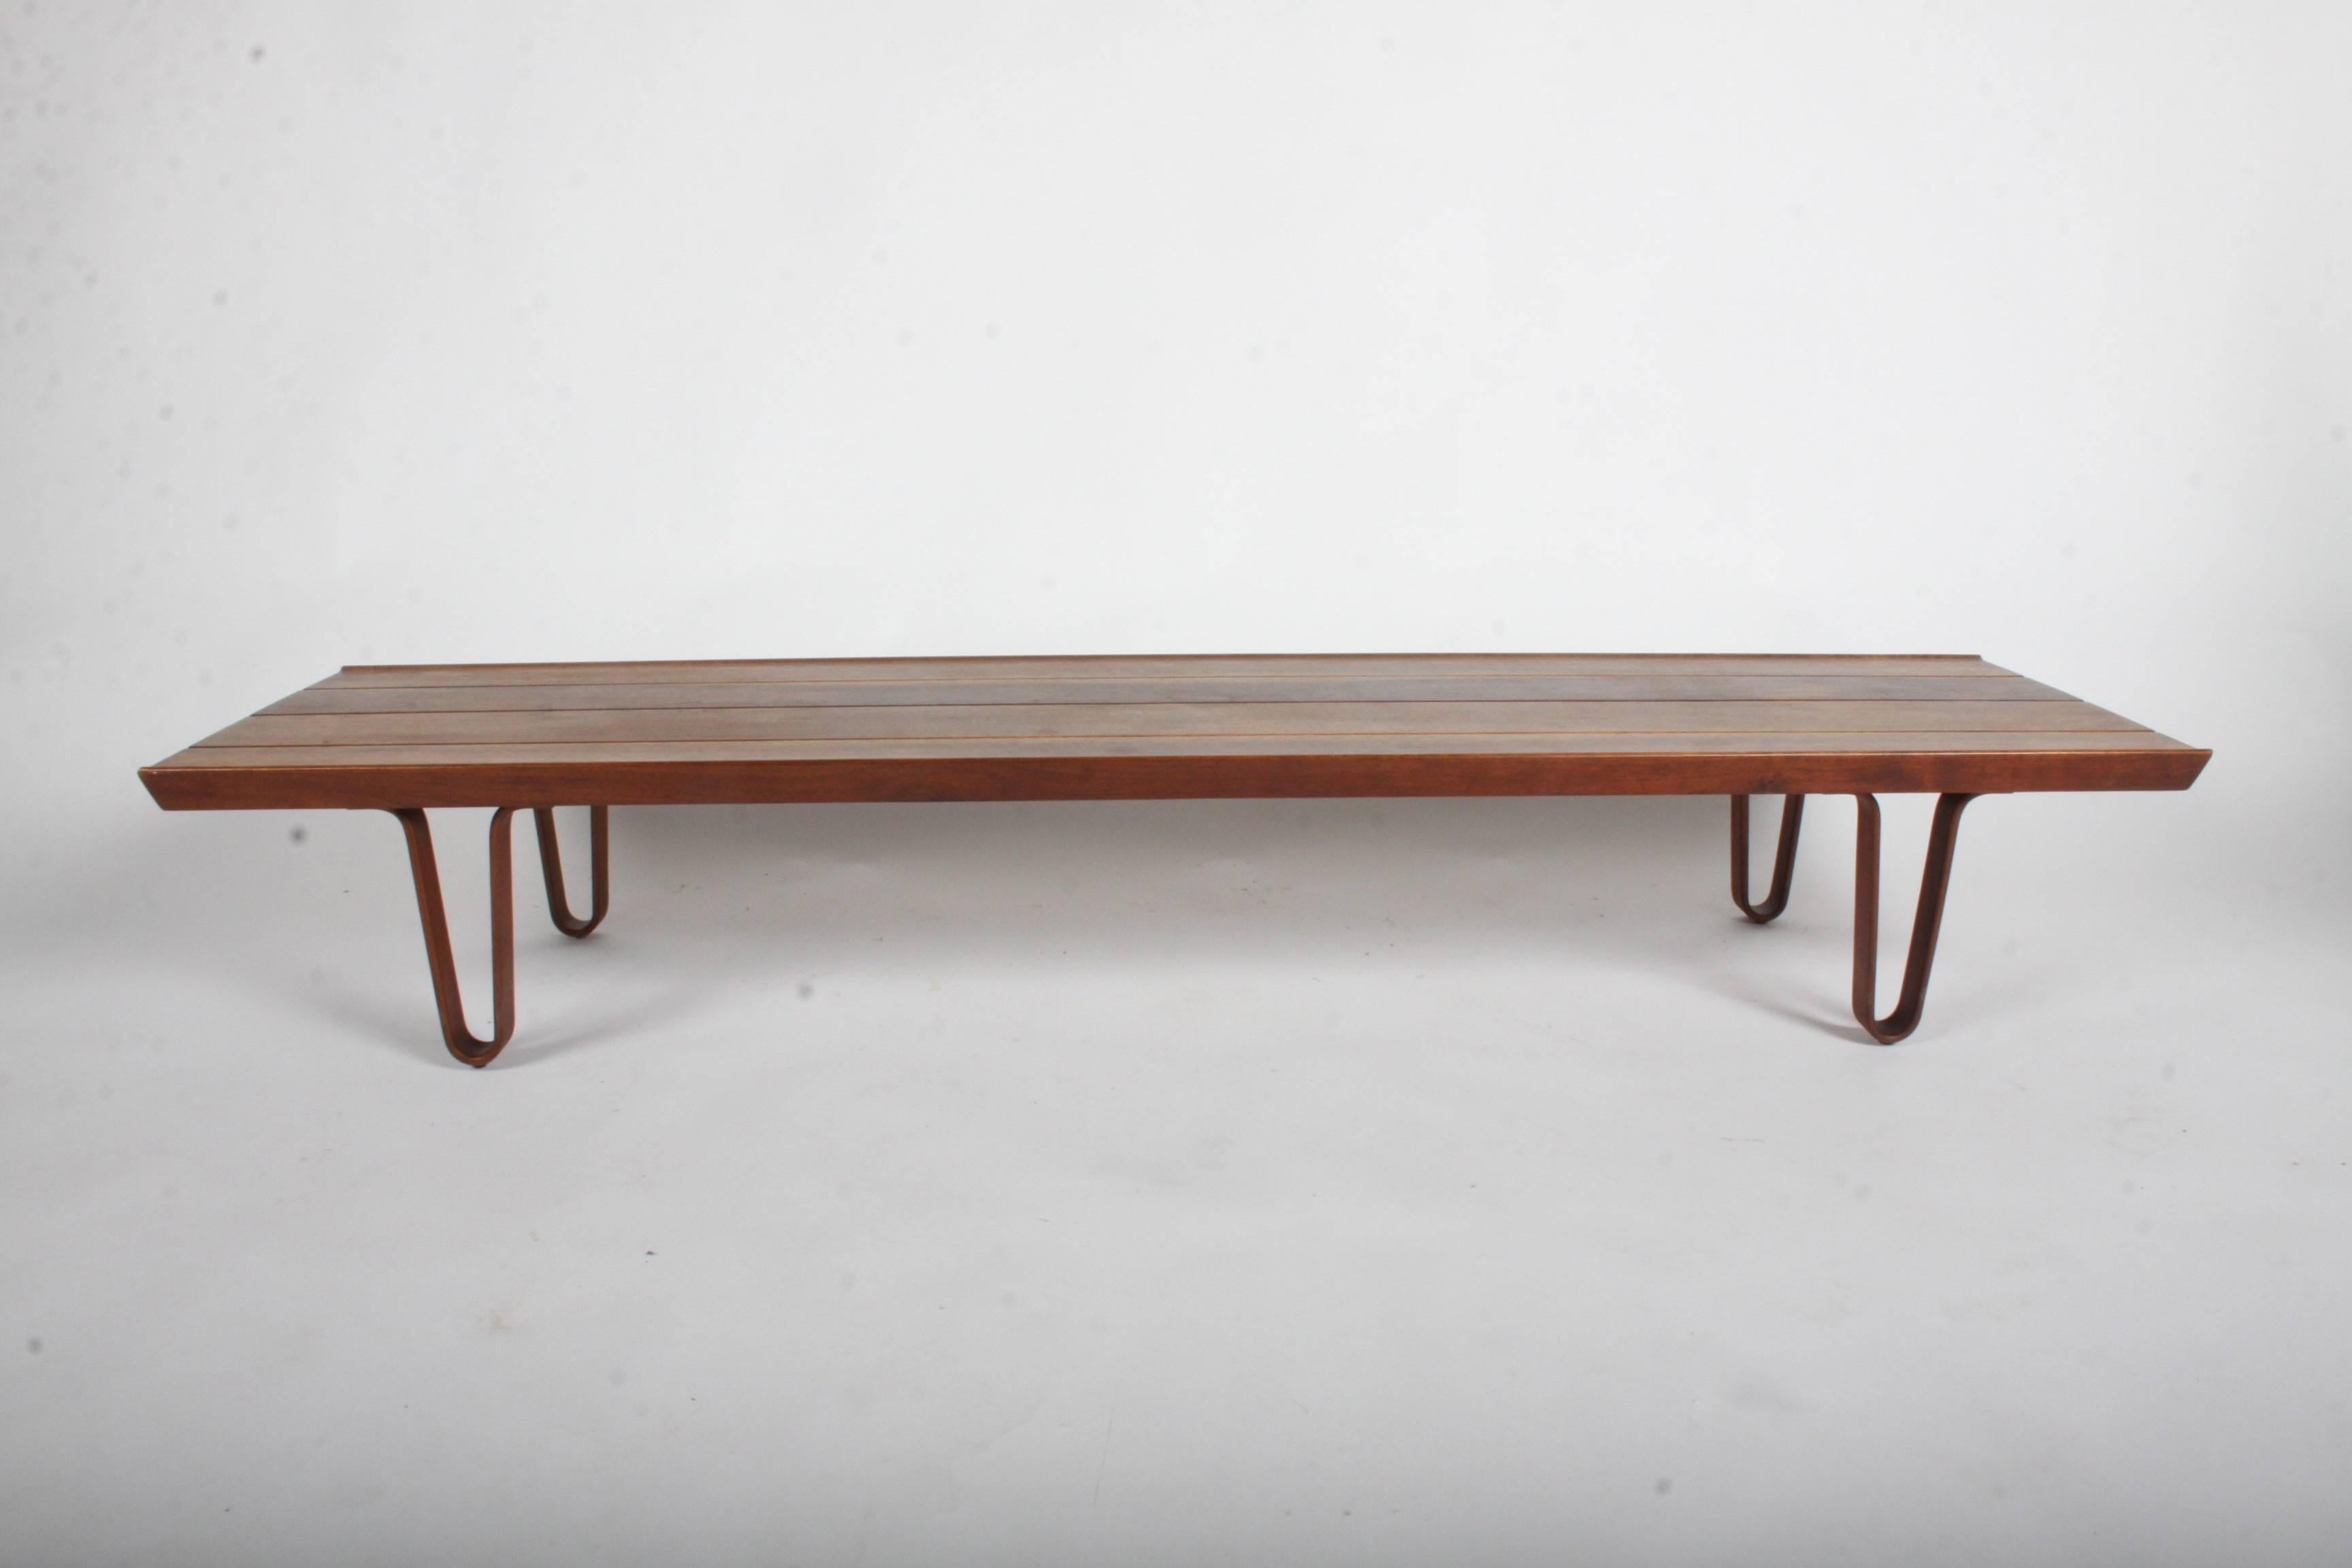 Edward Wormley for Dunbar, beautiful sap walnut long John bench or coffee table on bentwood legs. Original oiled finish, retains brass Dunbar tag. Very nice original condition, few minor blemishes. Can be used as a bench with cushions or coffee